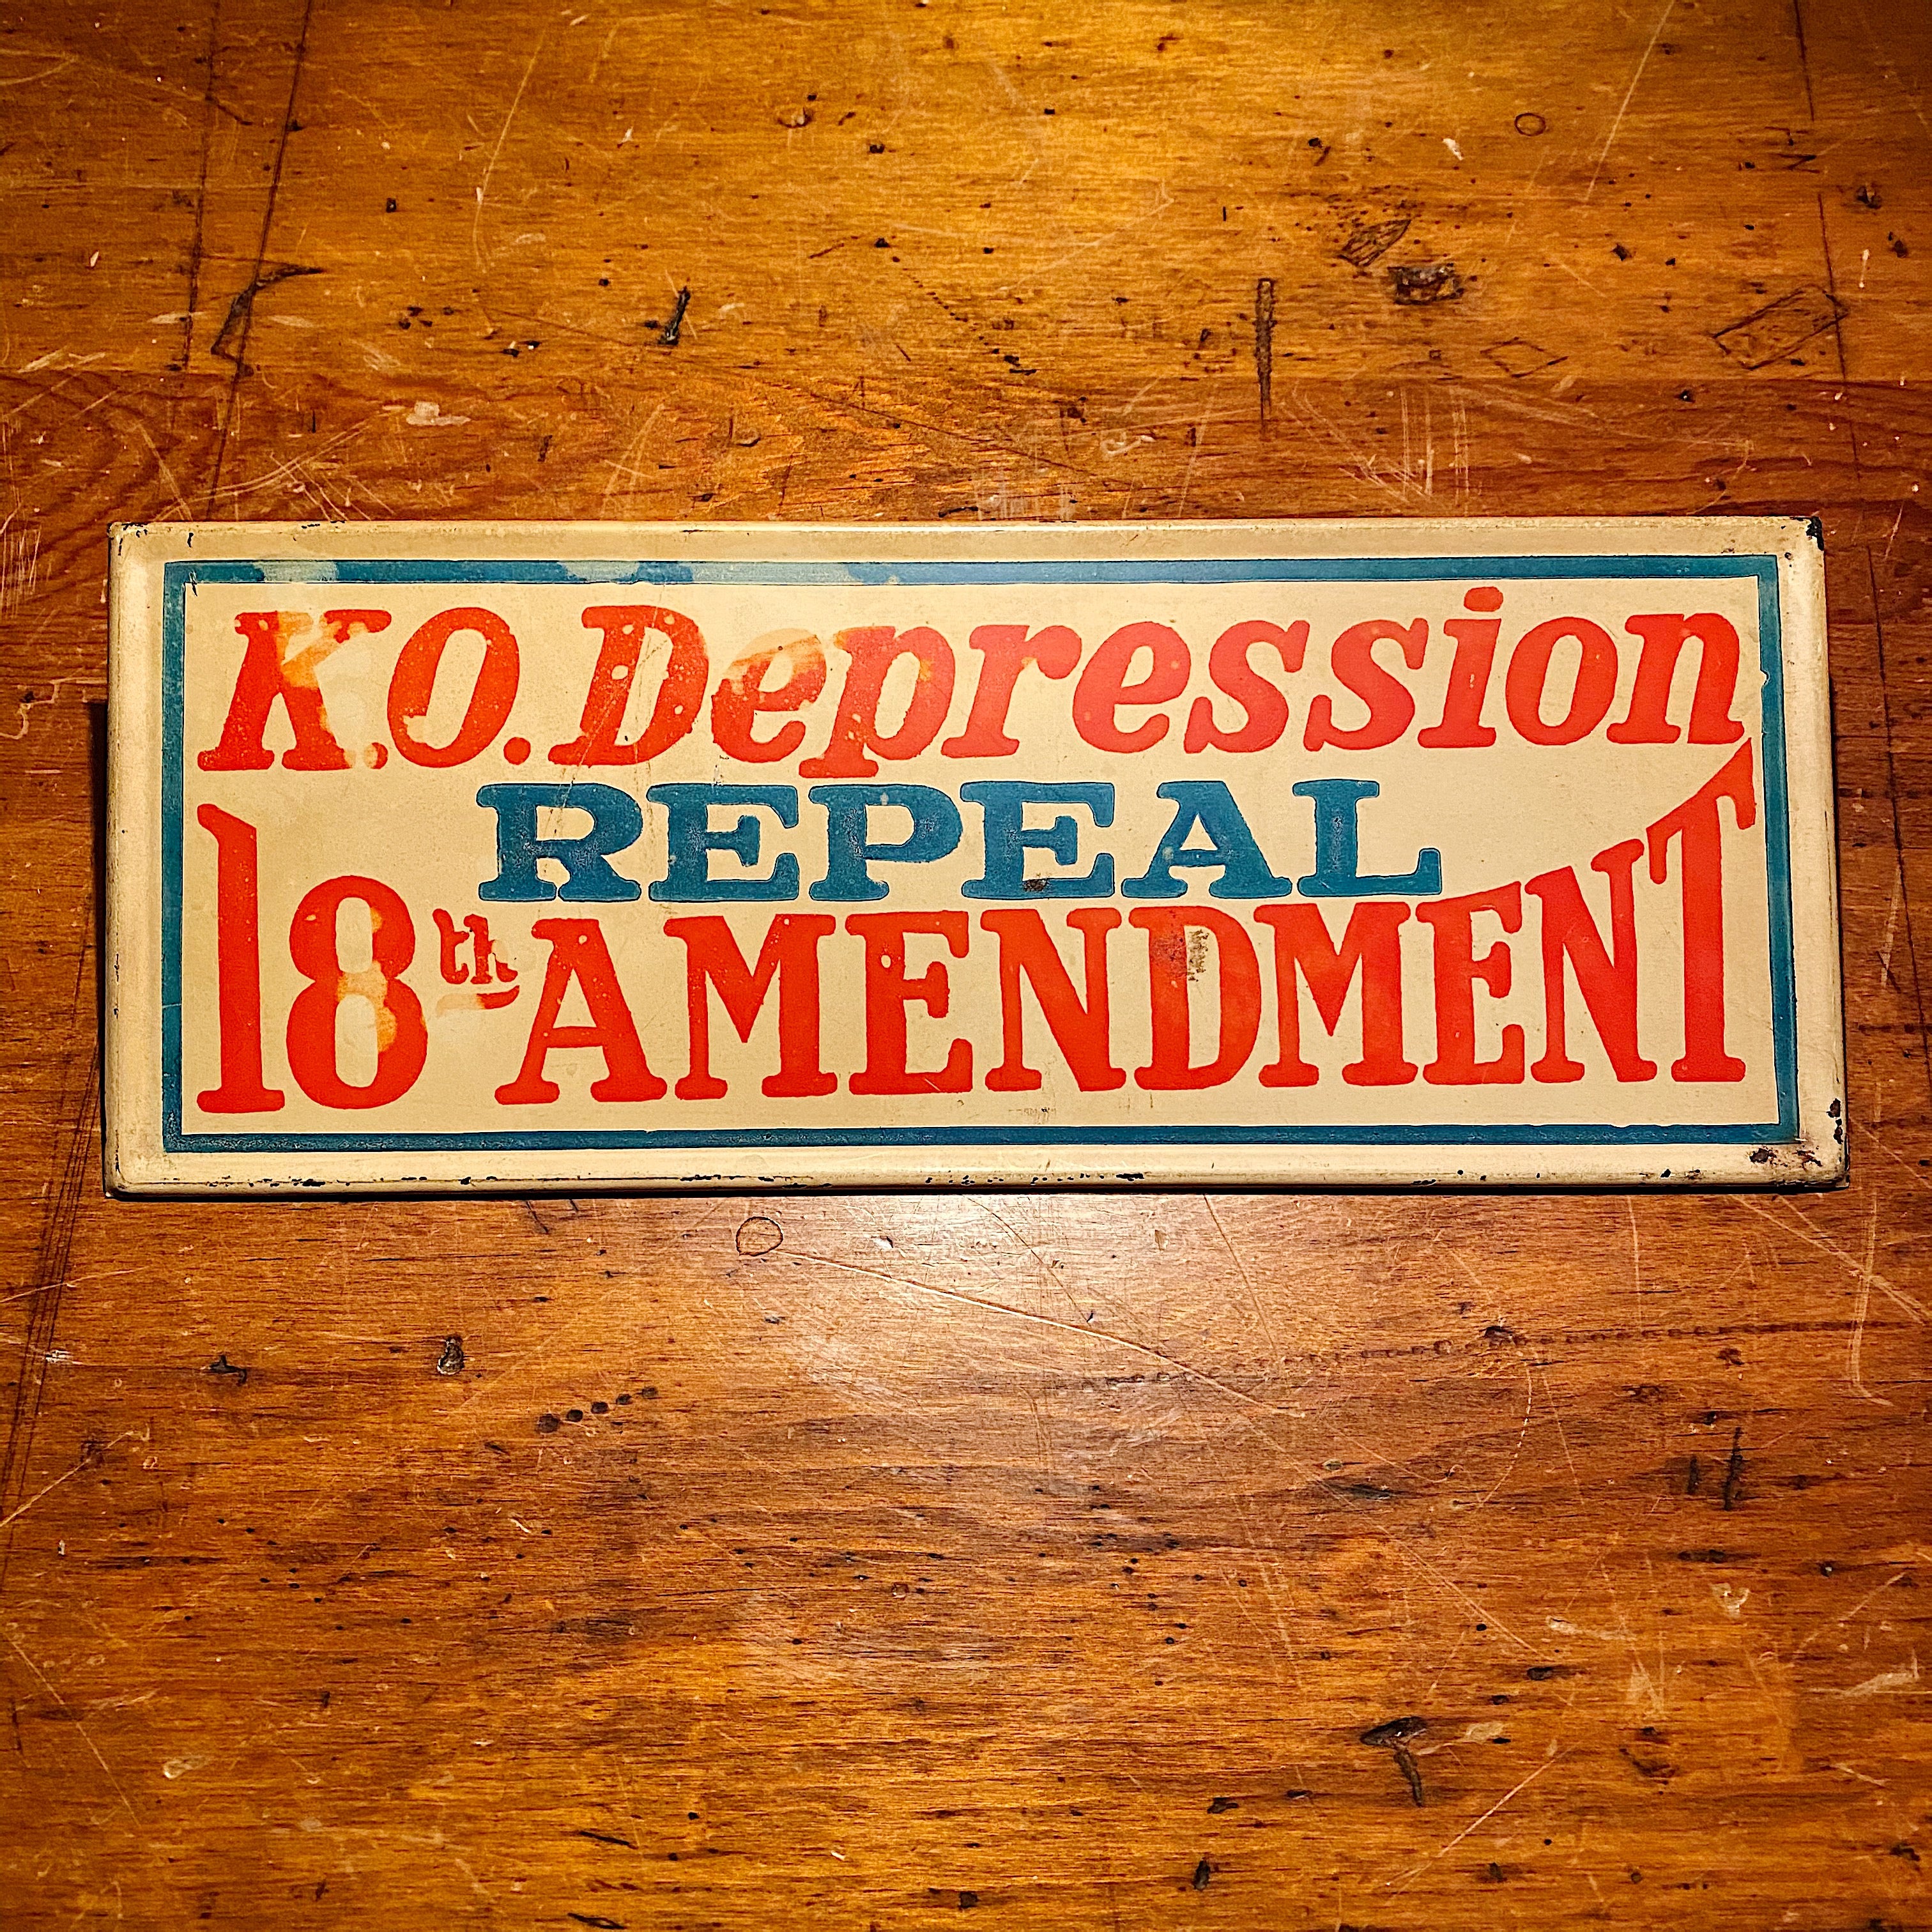 Repeal 18th Amendment Sign from 1930s - Rare Prohibition Era Metal Signs - KO Depression - 11" x 4" - Boxing Theme Political Signs - Alcohol